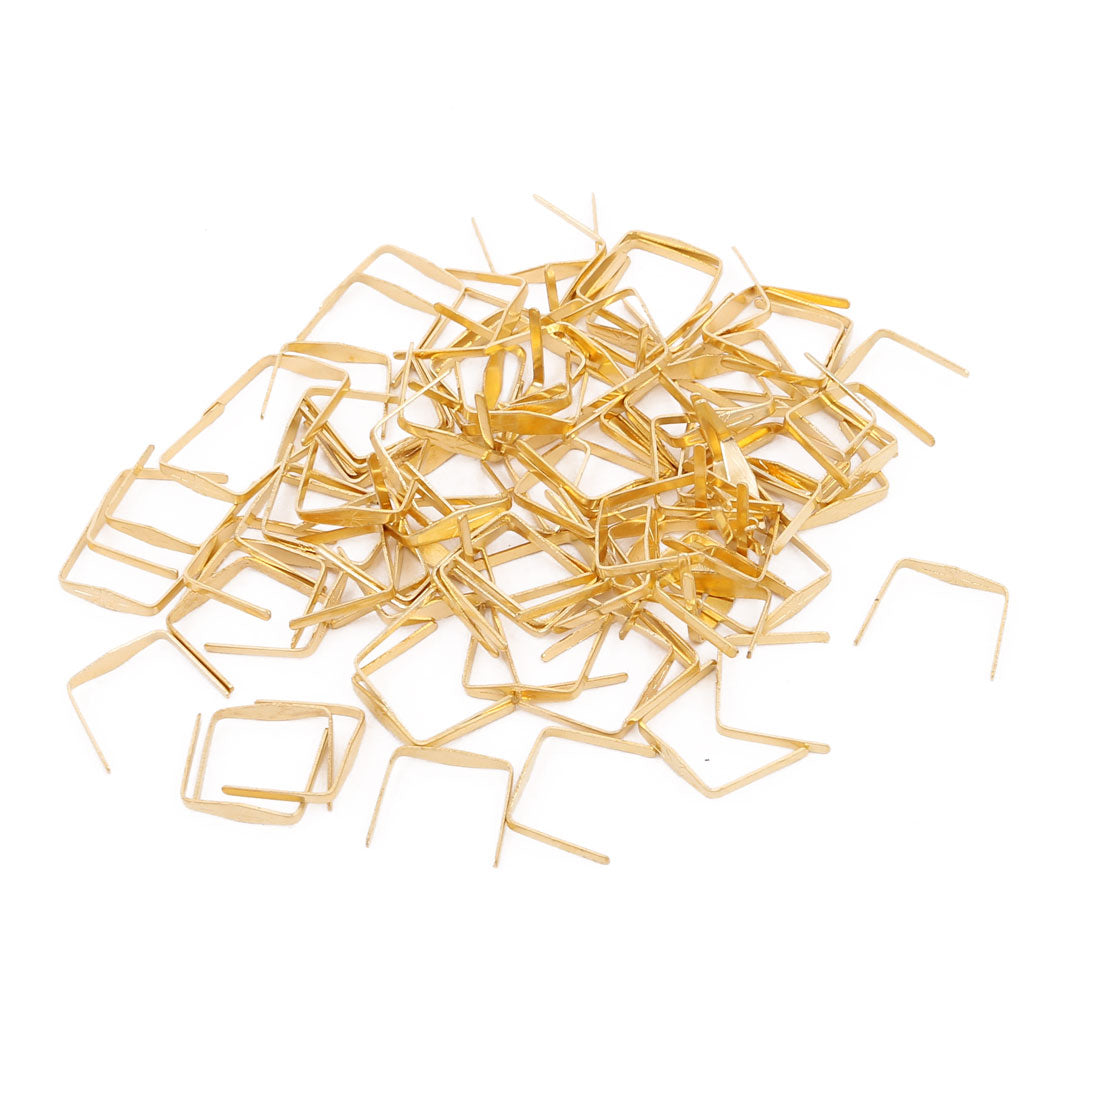 uxcell Uxcell 100 Pcs Chandelier Connectors Buckle 12mm Width Gold Tone for Fastening Crystal